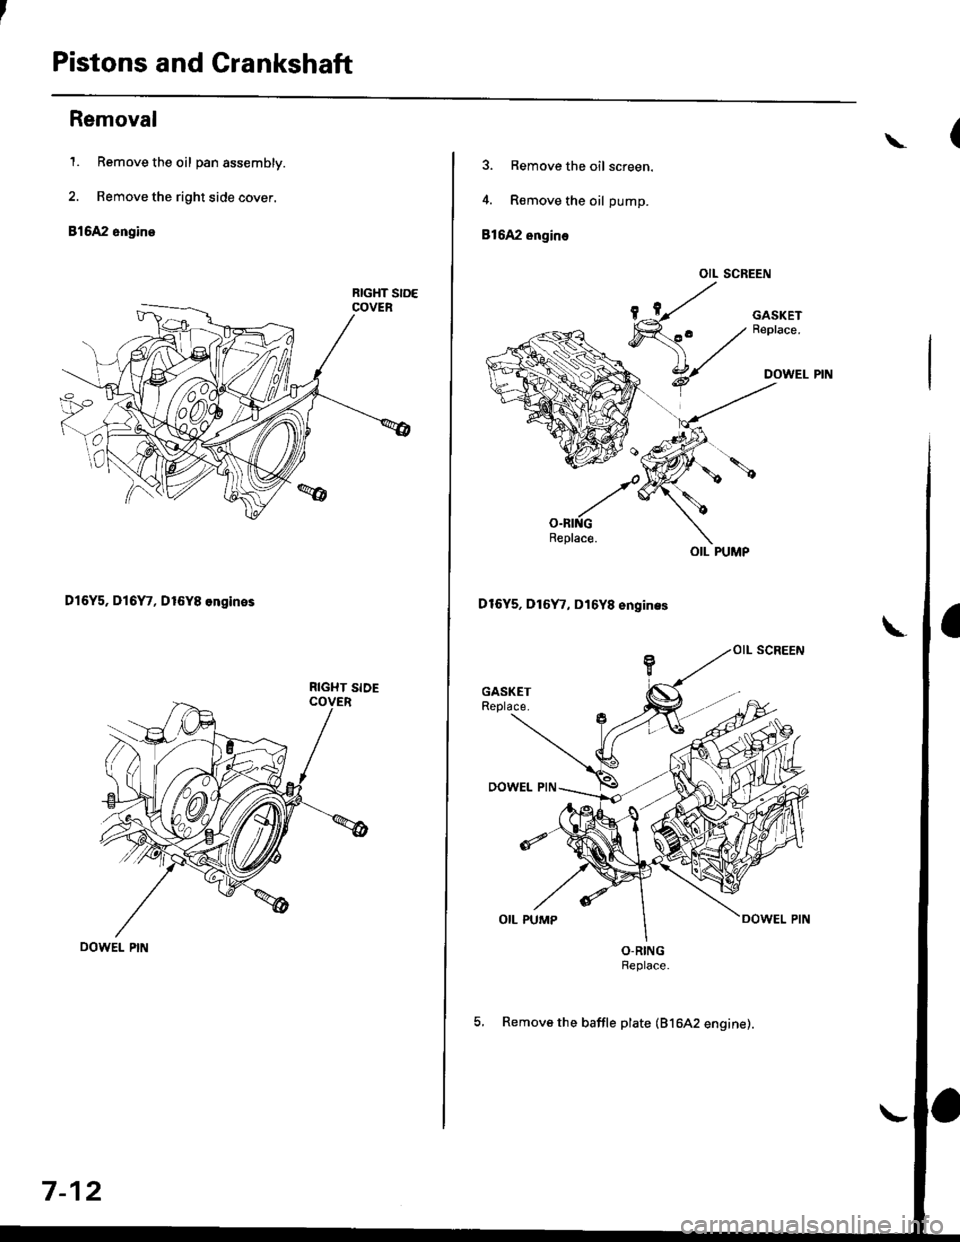 HONDA CIVIC 2000 6.G Repair Manual Pistons and Crankshaft
Removal
1. Remove the oil pan assembly.
2. Remove the right side cover.
816A2 engine
D16Y5, Dl6Y7, D16Y8 ongines
RIGHT SIDE
7-12
\
3. Remove the oil screen.
4. R€move the oil 